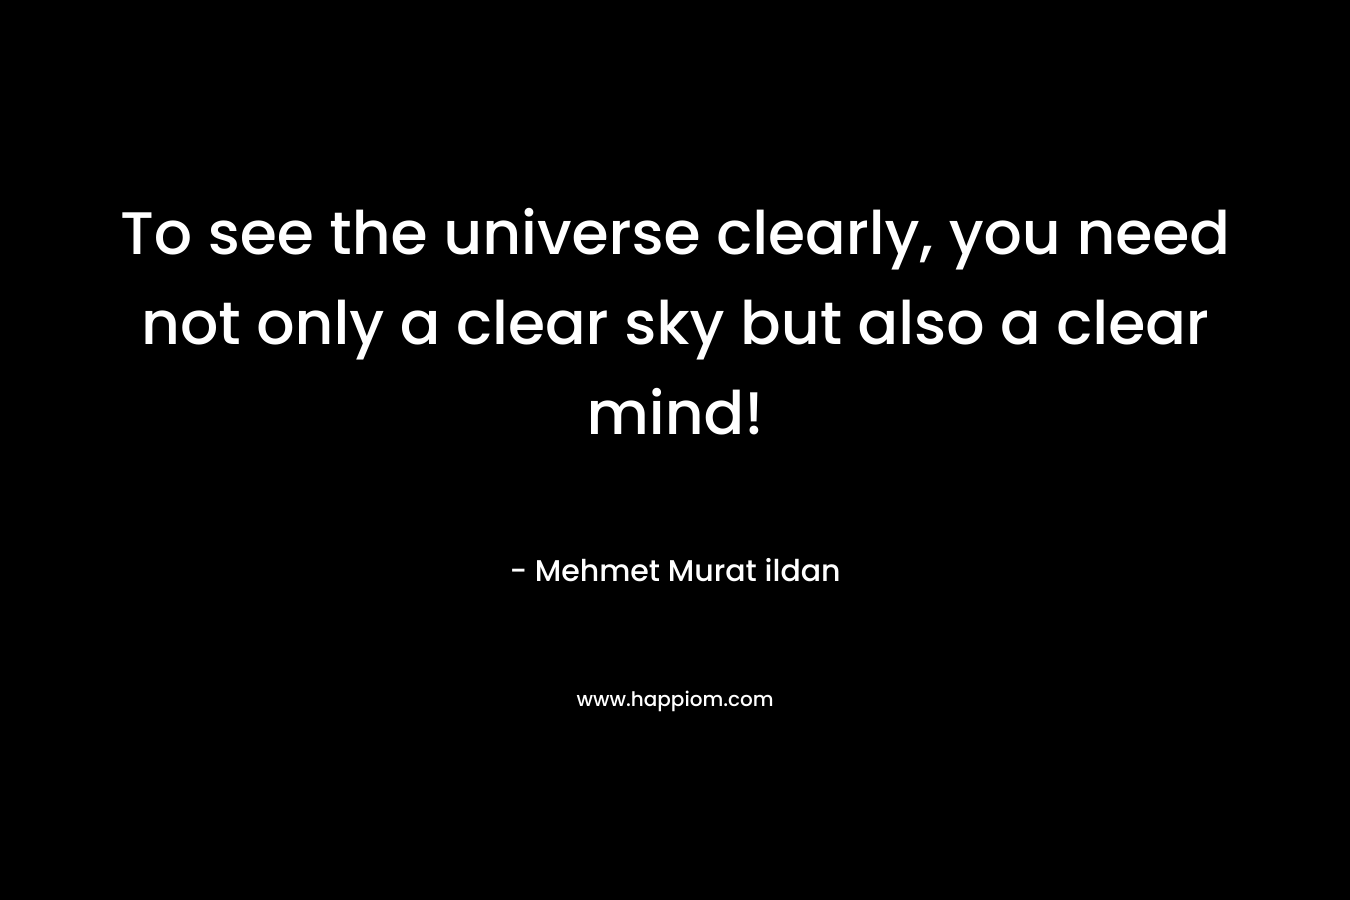 To see the universe clearly, you need not only a clear sky but also a clear mind!